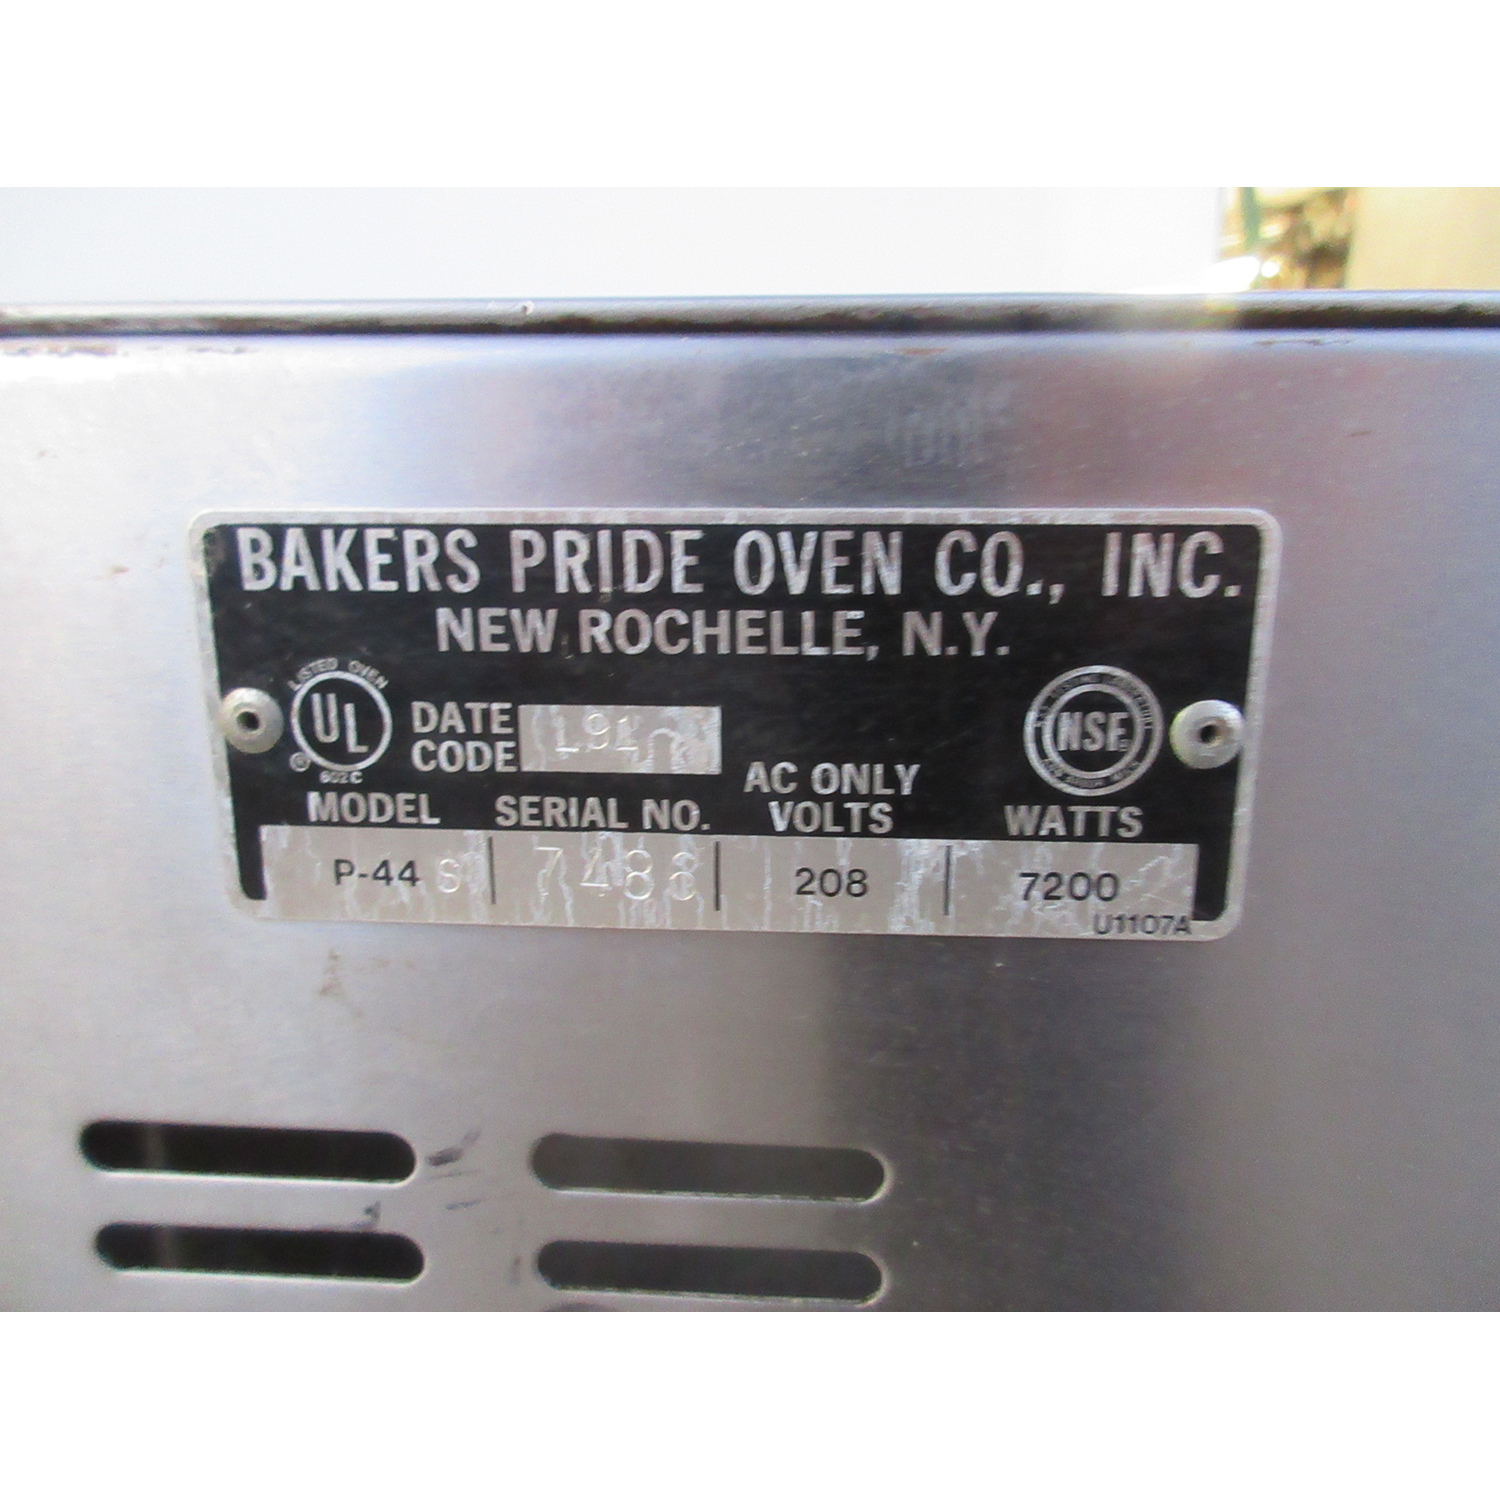 Bakers Pride P44 Oven Deck Double Countertop, Used Excellent Condition image 4